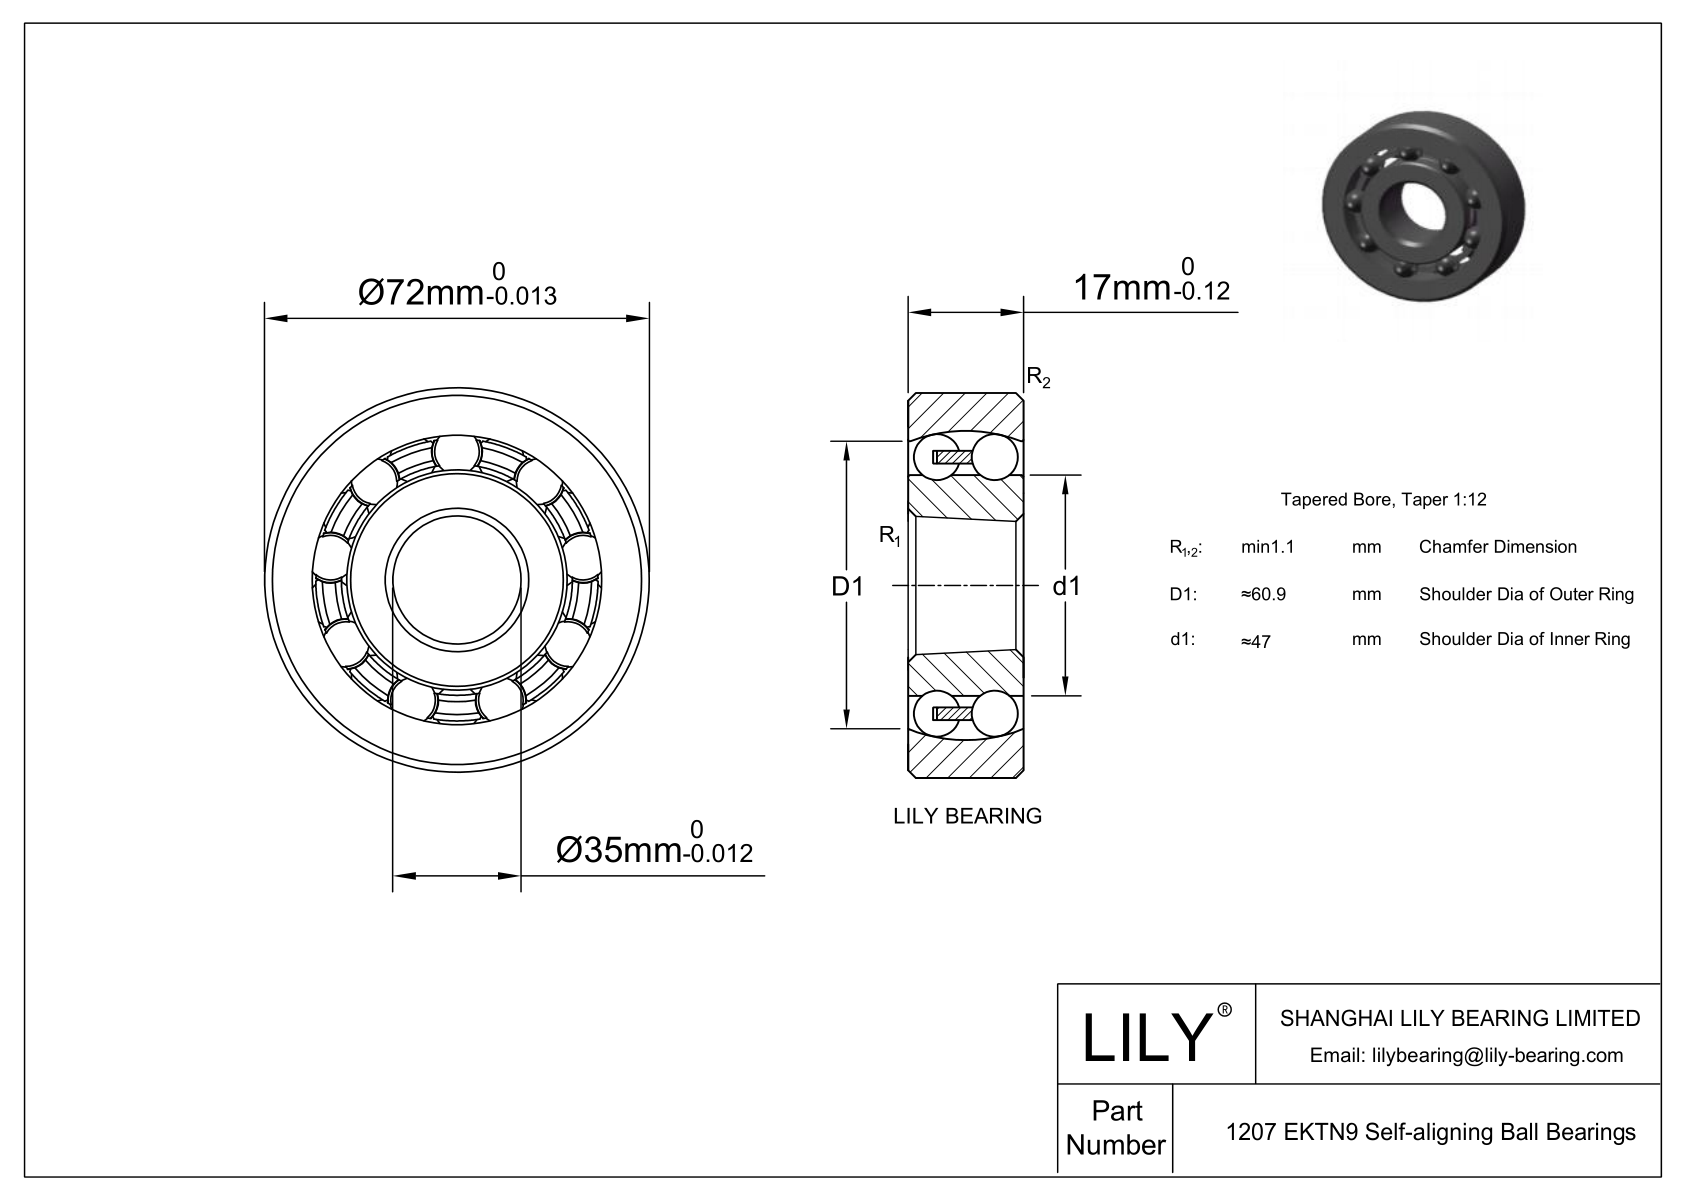 CE1207SC Silicon Carbide Self Aligning Ball Bearings cad drawing